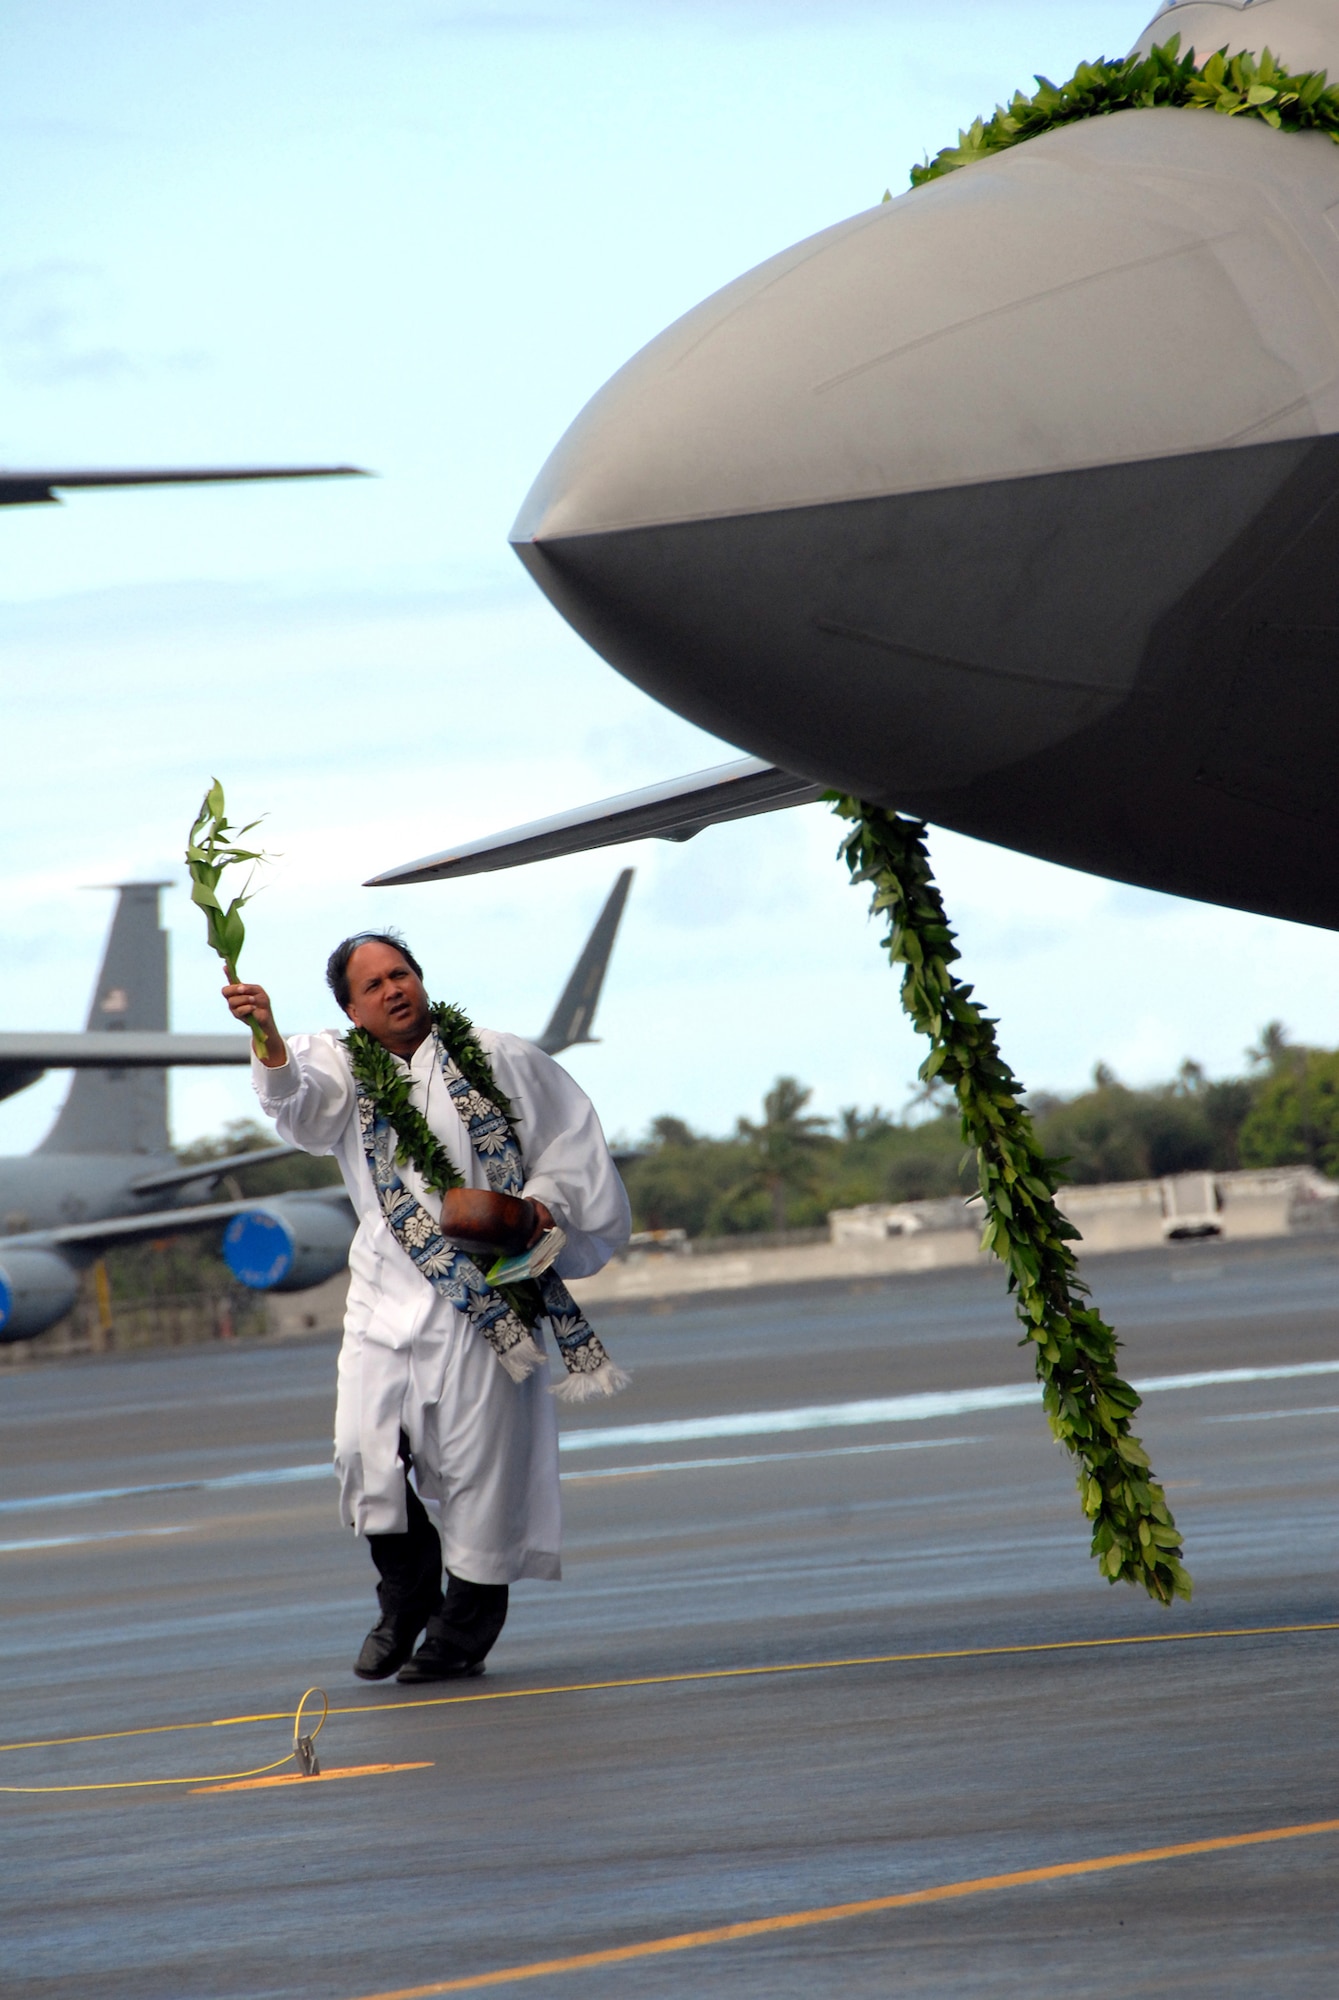 In the Hawaiian tradition, Kahu Kordell Kekoa blesses the F-22 Raptor with ti leaves and Hawaiian water during the F-22 Raptor Arrival Ceremony on Joint Base Pearl Harbor-Hickam, Hawaii, July 9. The arrival of the F-22 Raptor marks the beginning of a new associate unit between the Hawaii Air National Guard and the active duty Air Force. (U.S. Air Force photo/Tech. Sgt. Betty J. Squatrito-Martin)